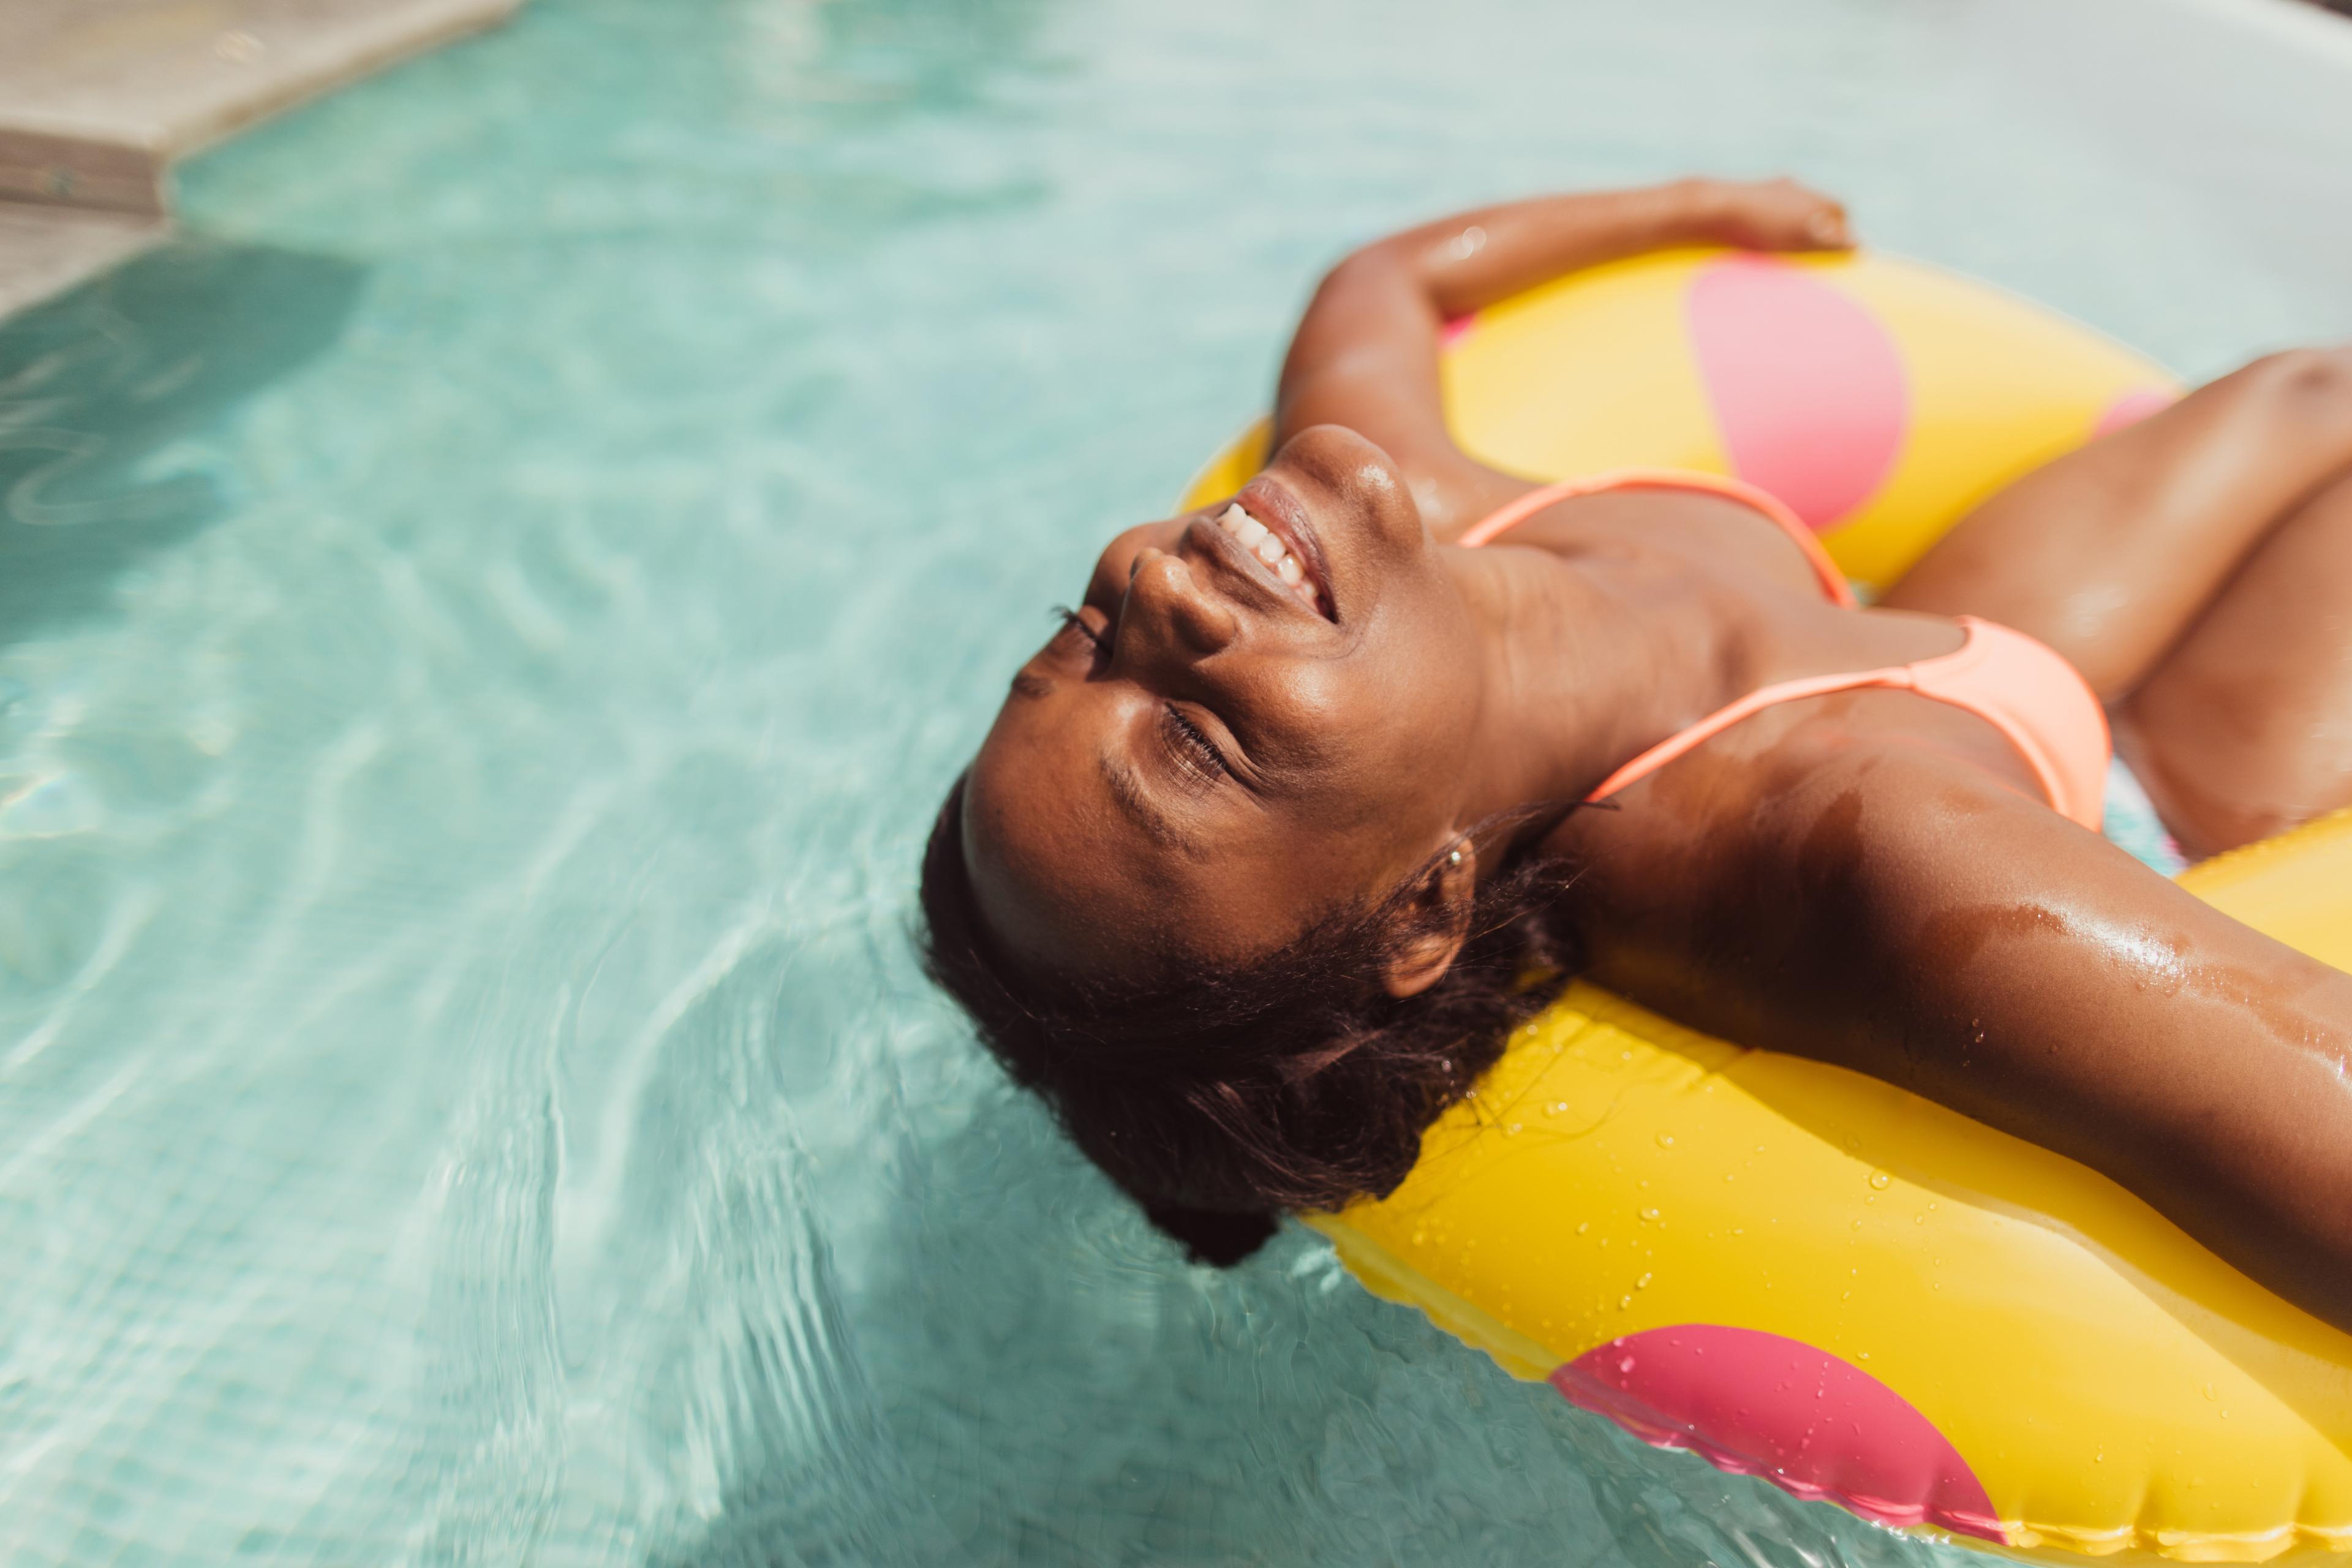 A Black woman in a swimsuit smiles with closed eyes as she floats in a swimming pool on a bright yellow pool ring.